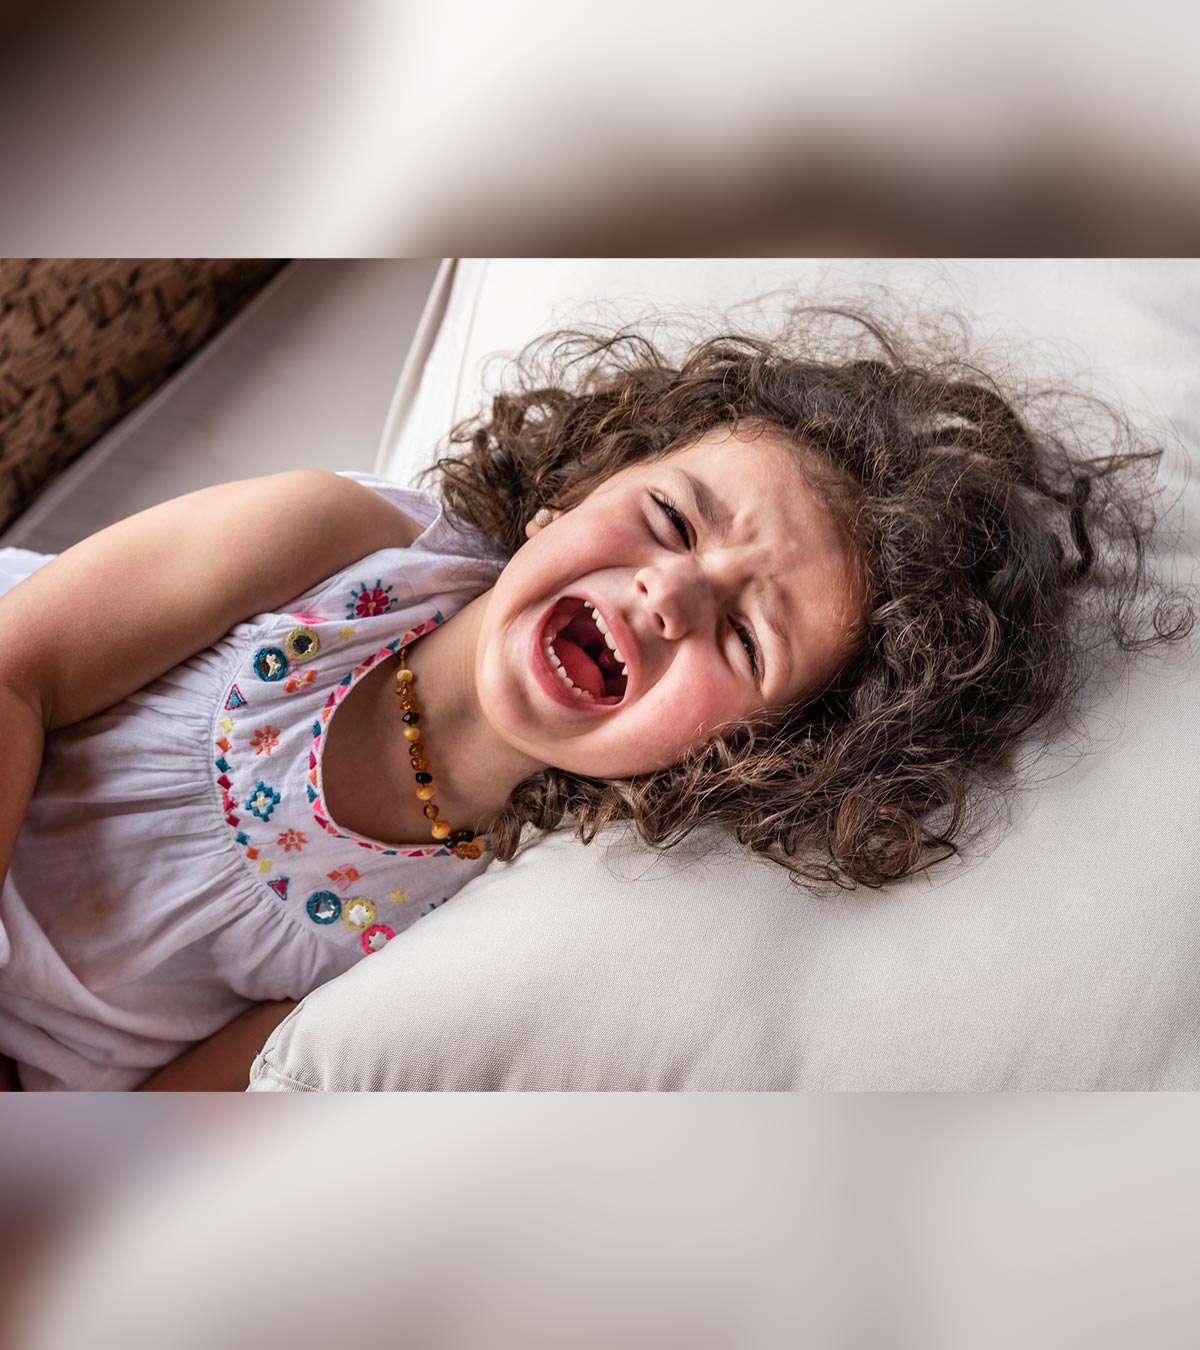 Toddler Bedtime Tantrums: Why It Happens And Tips To Manage